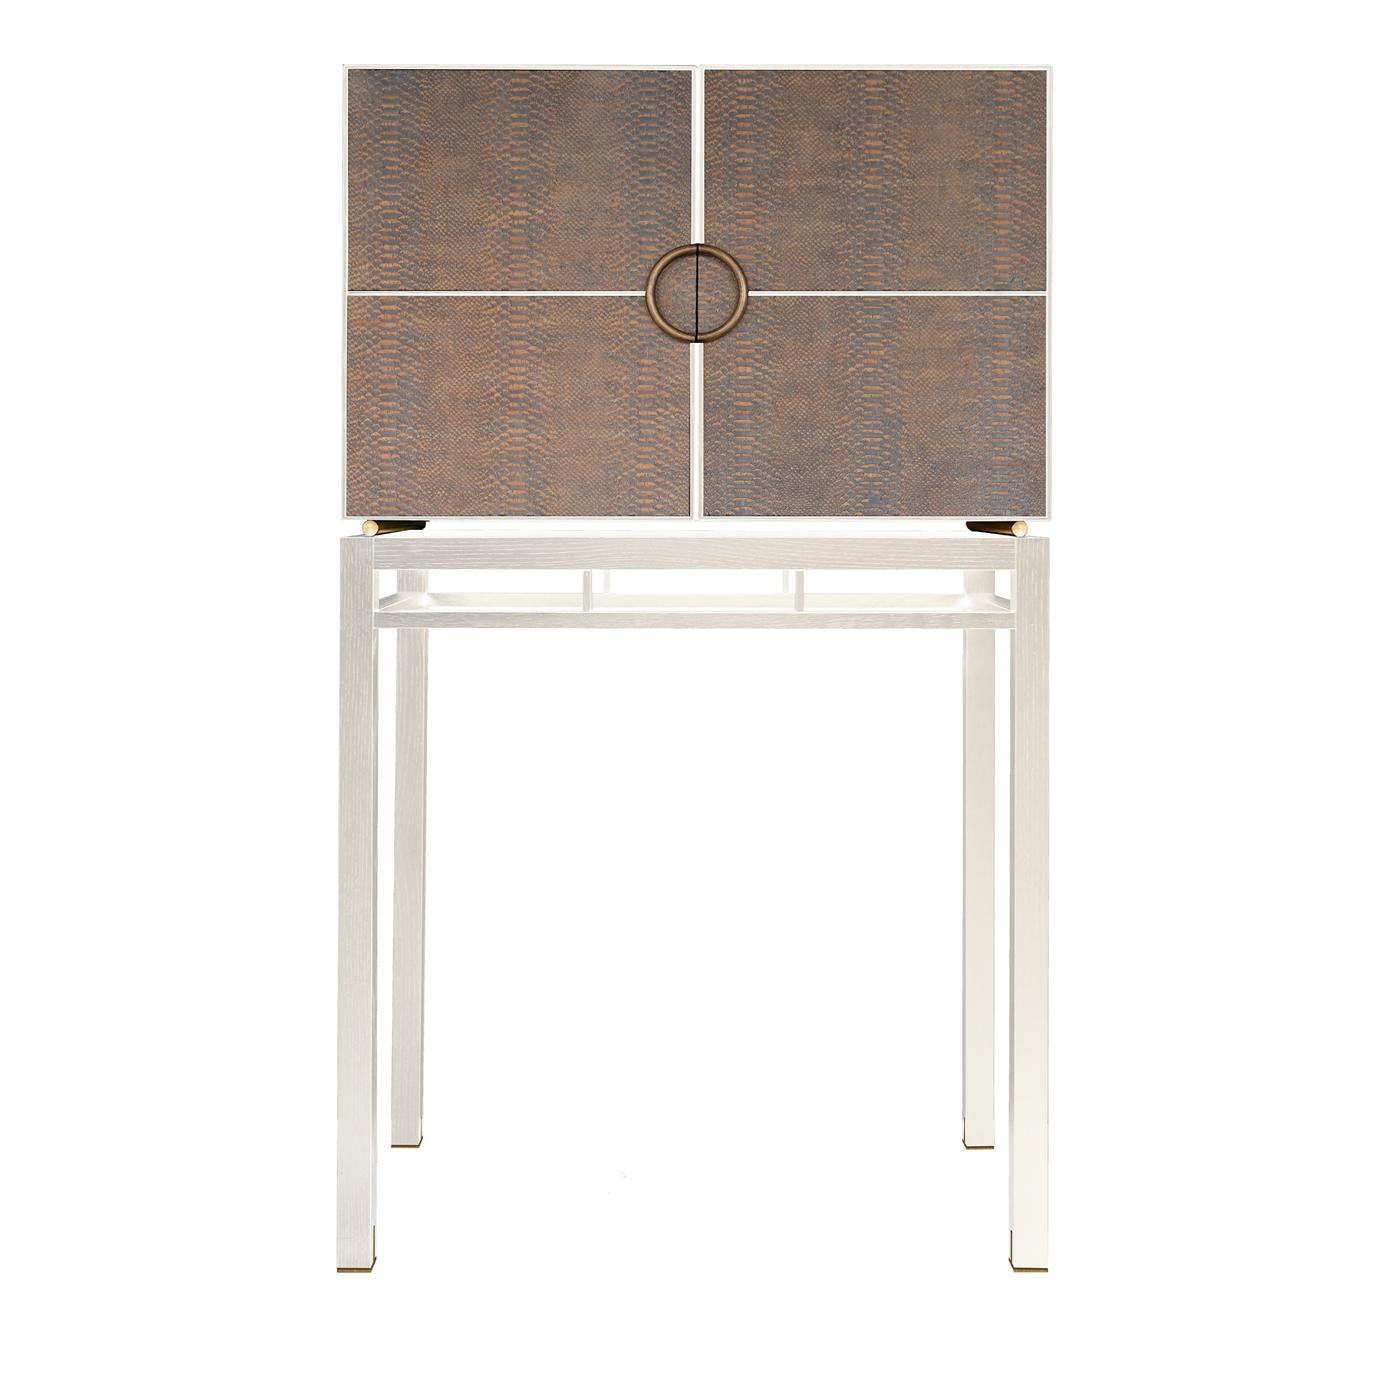 Timeless elegance and versatile sophistication distinguish this stunning bar cabinet. A piece that will infuse any room with a refined allure, it is made of white-stained oak wood and boasts a snake-patterned cork cover on its two doors enriched